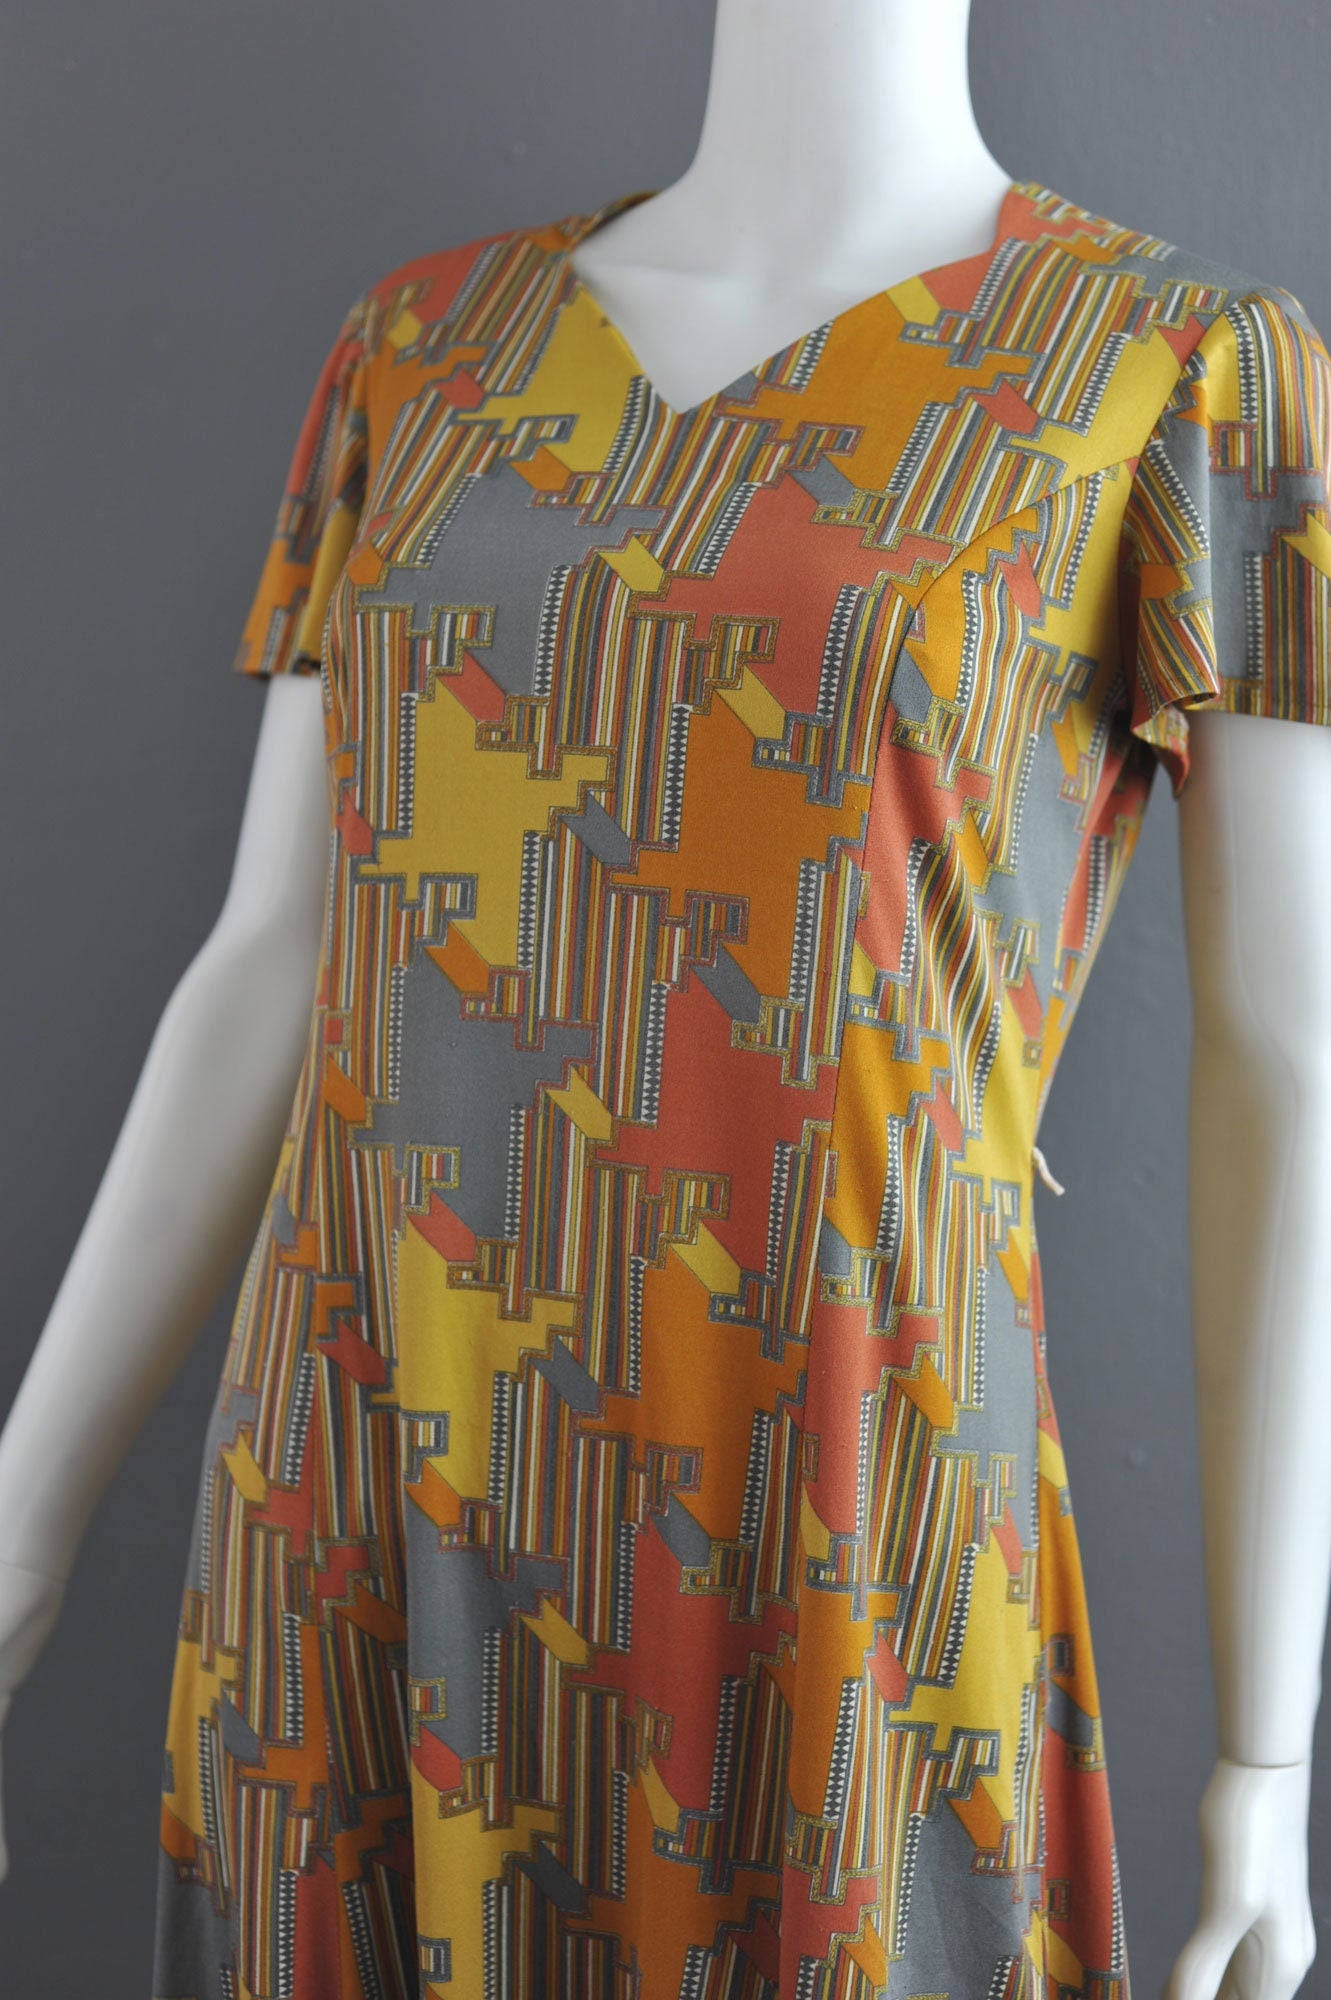 70s Psychedelic Houndstooth Dress, Abstract Eastex Day Dress, Size Medium